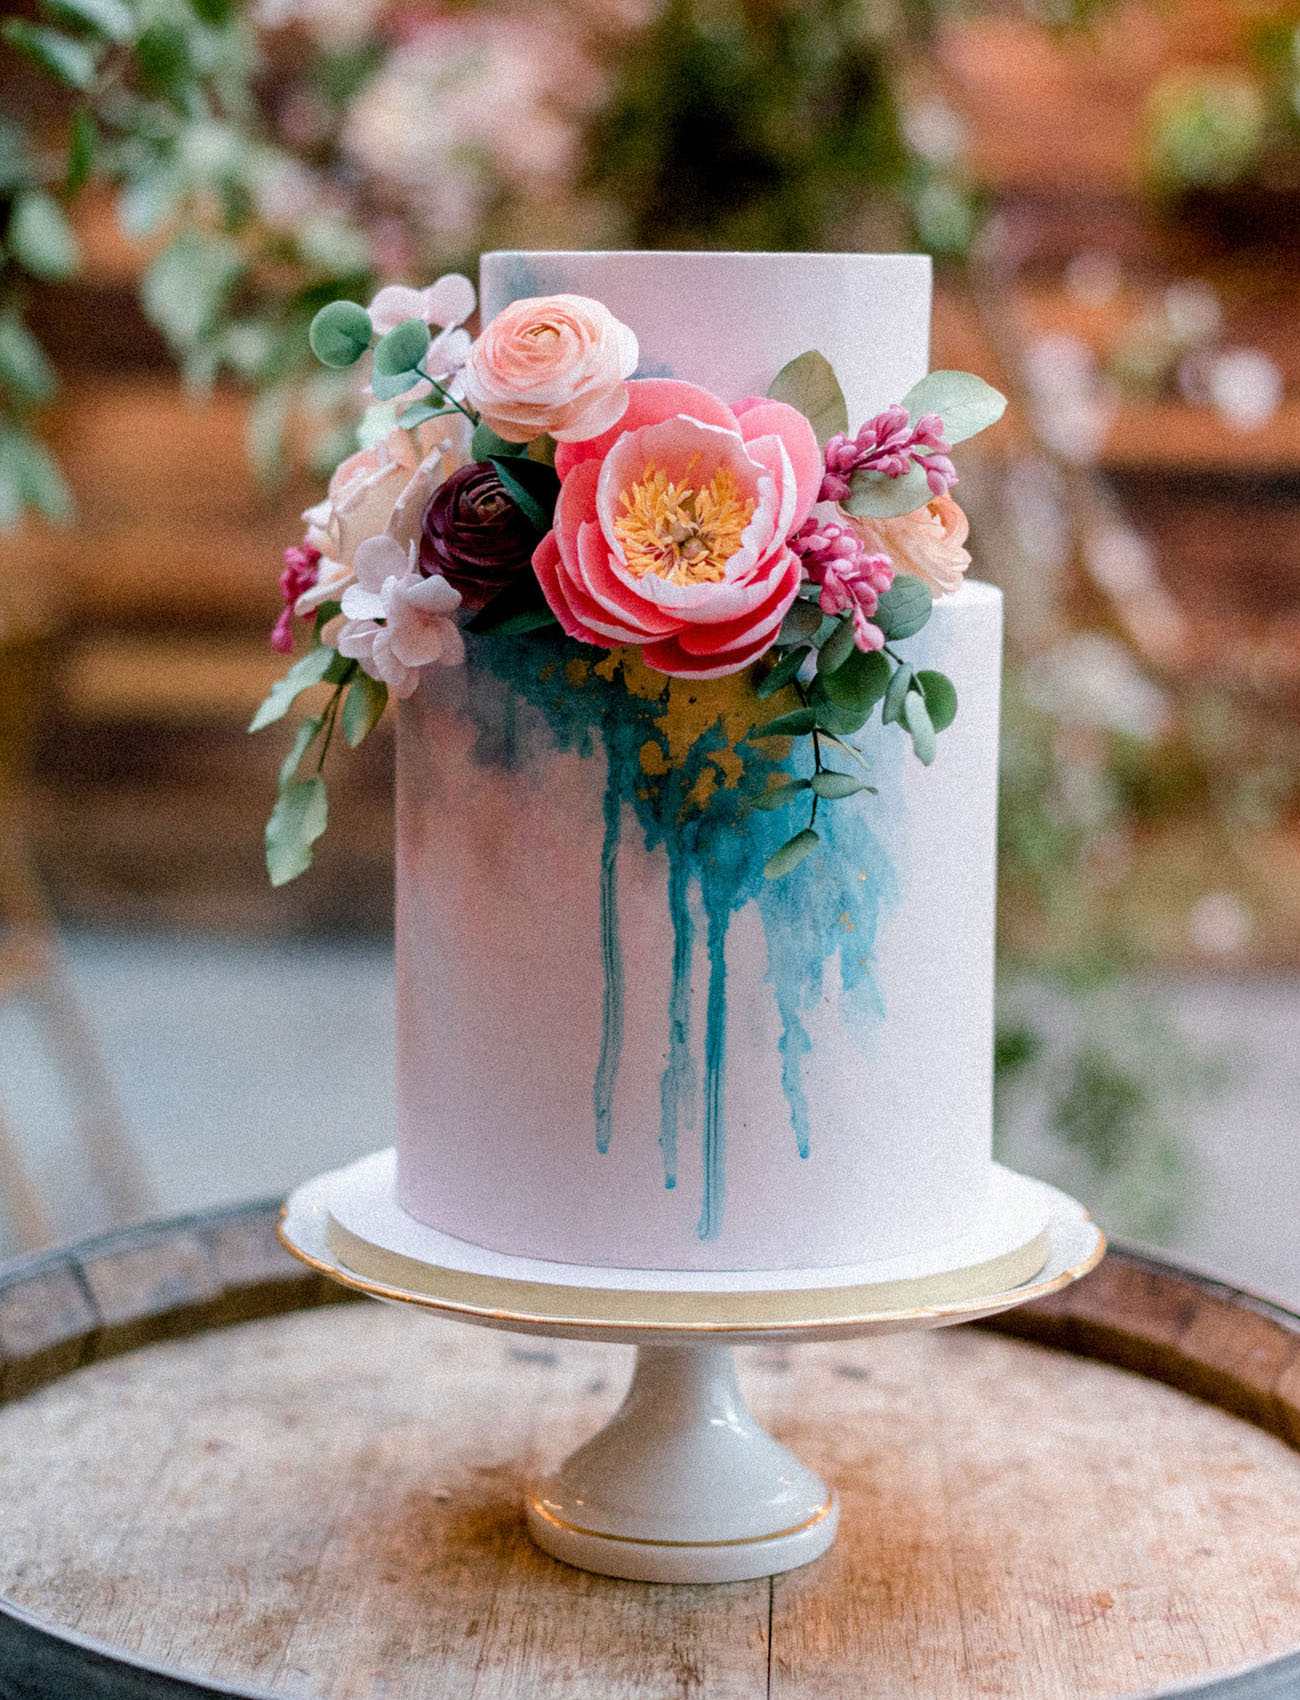 The wedding cake combined pink and teal and lush fresh blooms